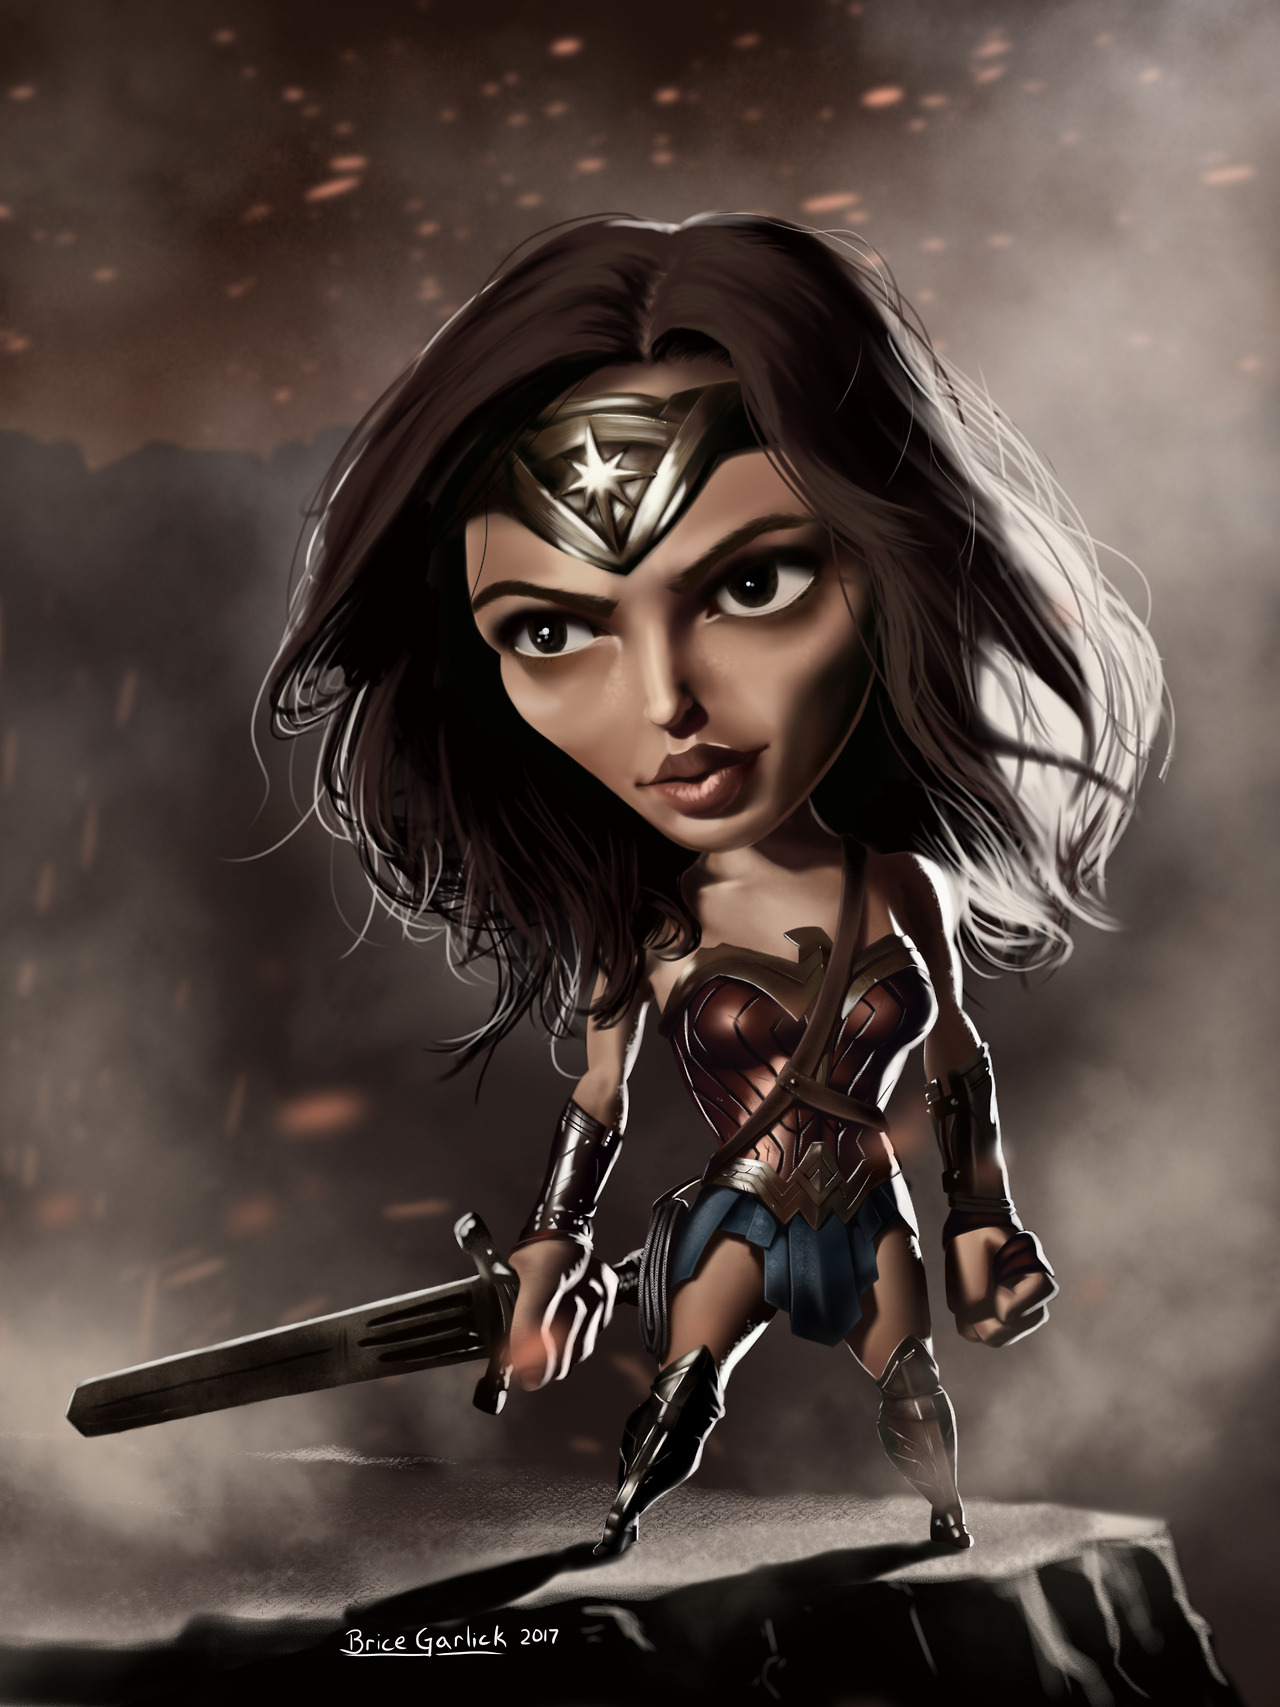 Diana of Themyscira by: Brice Garlick wookieeserenade.tumblr.com — Immediately post your art to a topic and get feedback. Join our new community, EatSleepDraw Studio, today!